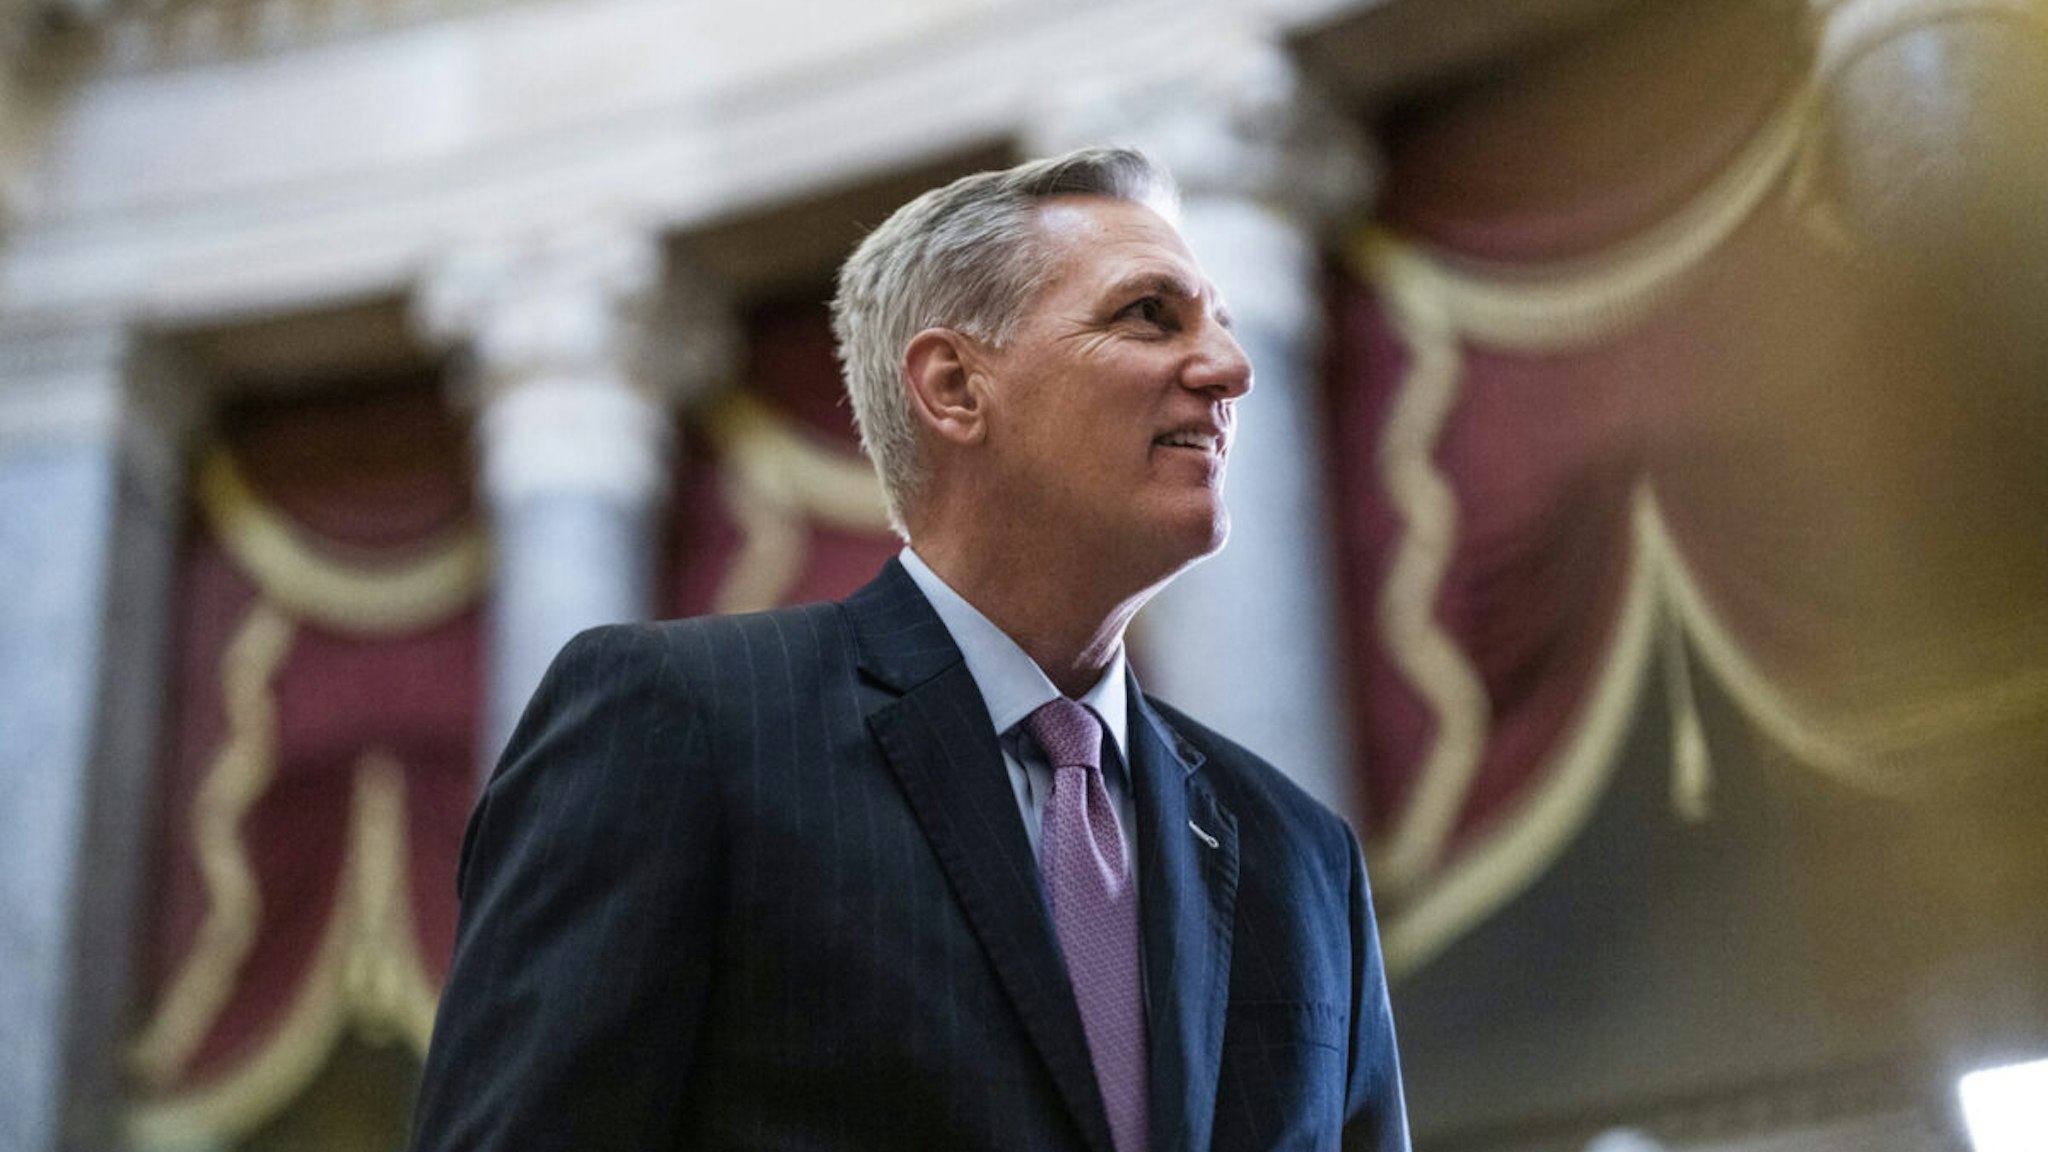 Speaker of the House Kevin McCarthy, R-Calif., conducts a news conference in the U.S. Capitols Statuary Hall on Thursday, January 12, 2023.